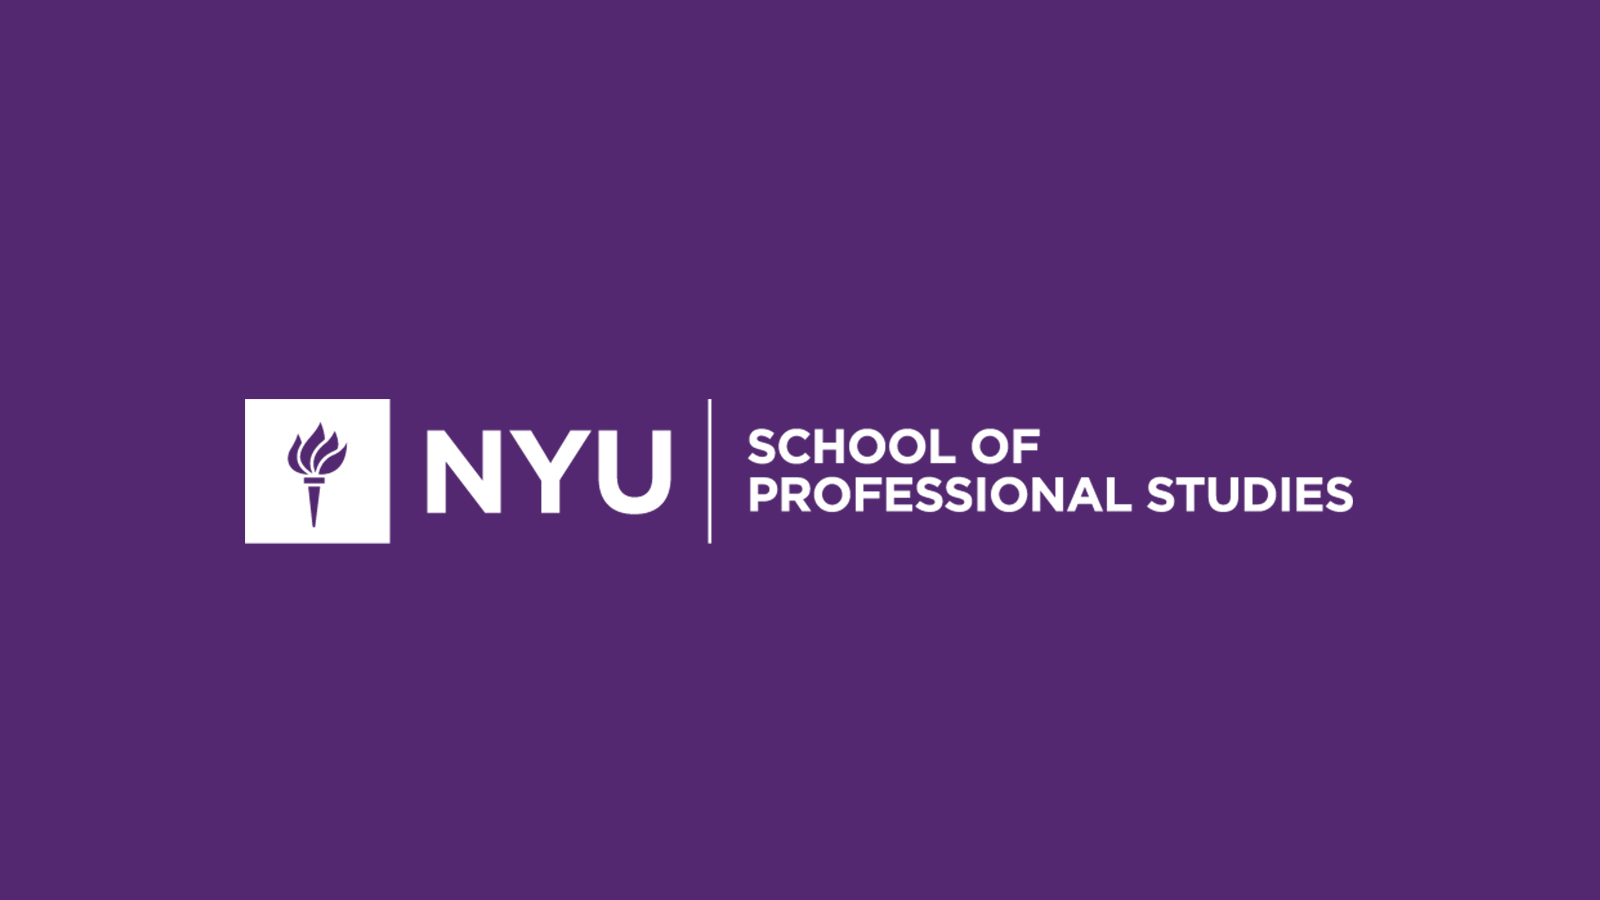 Nyu school of continuing and professional studies jobs